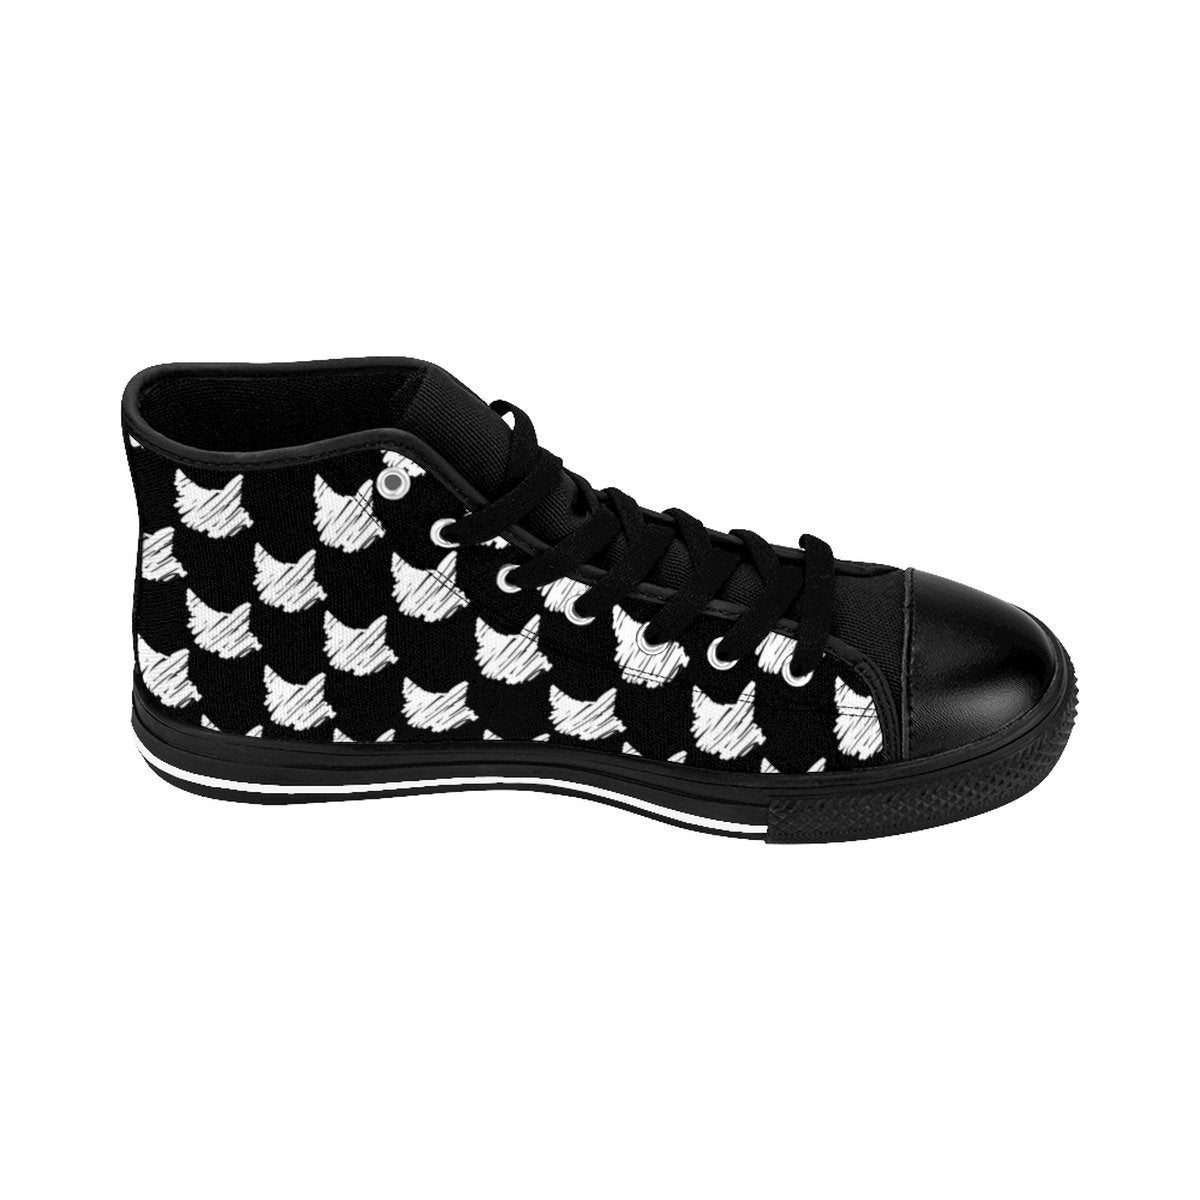 Unique Gifts for Cat Lovers, One of a Kind High-Top Cat Sneakers Featuring White Cats Printed On Black Canvas Fabric